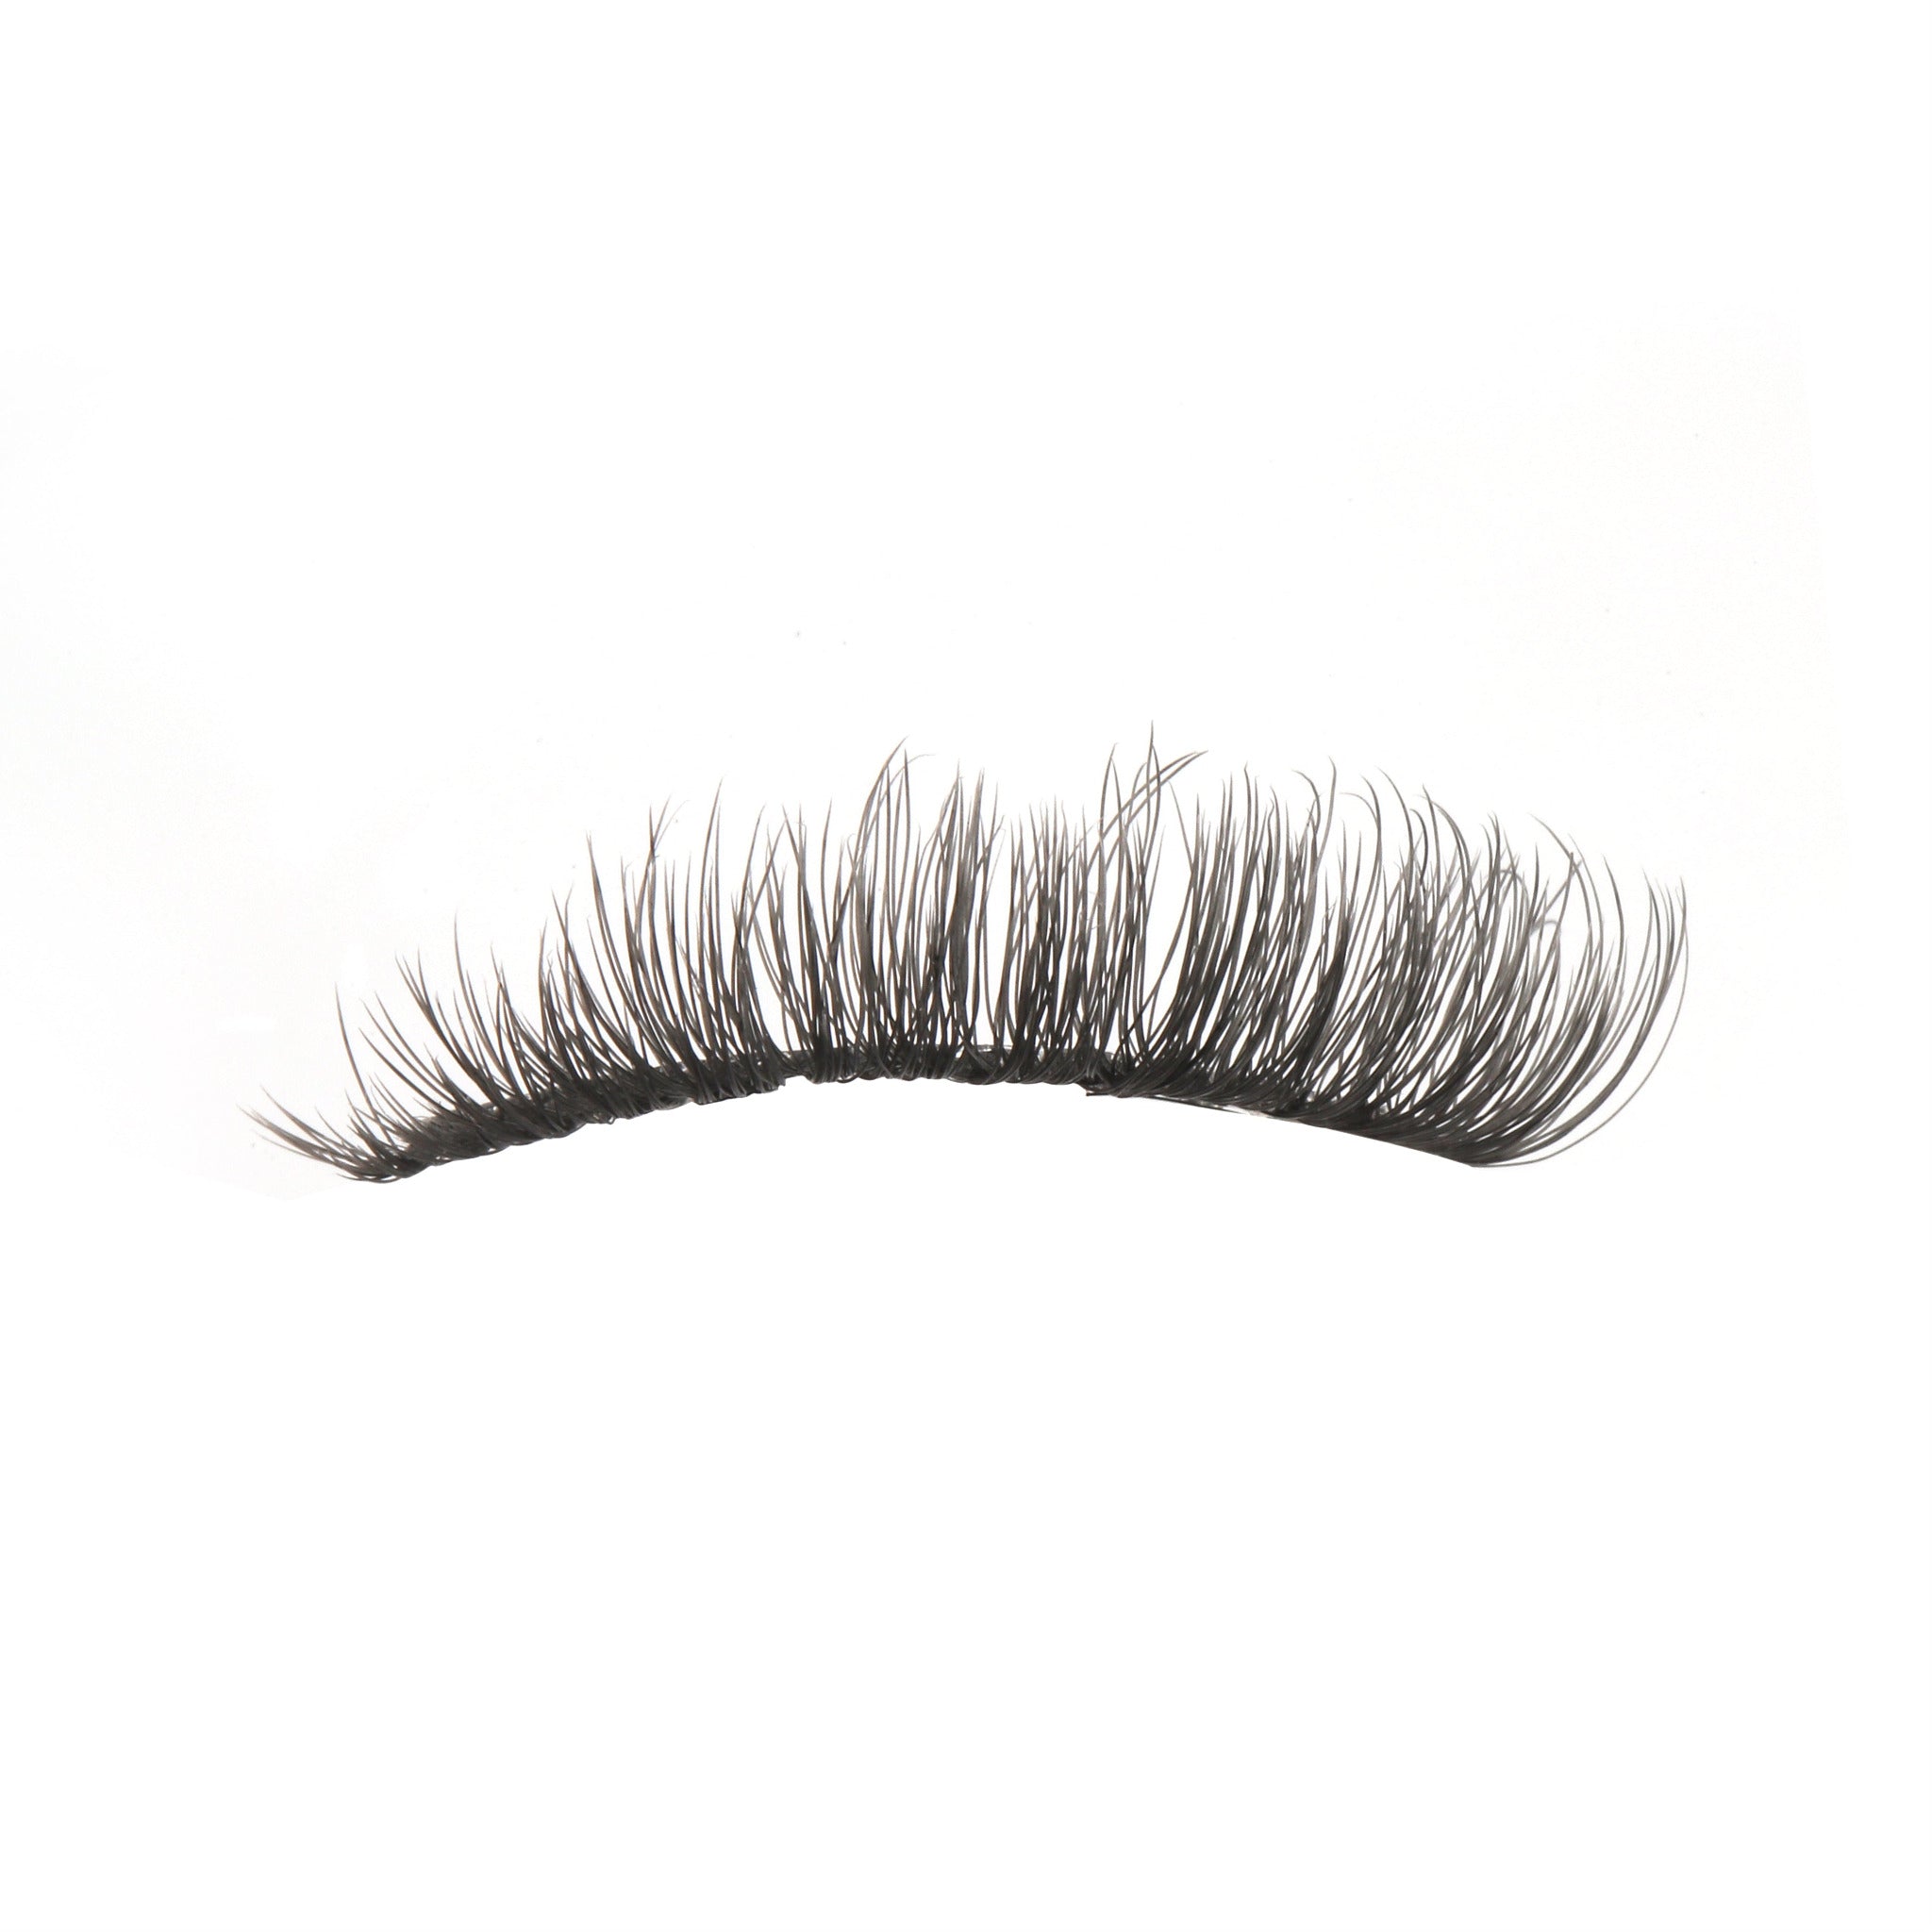 hand made lashes, full lash strips, volume style lash strips, strip lashes, false eyelashes, natural strip lash look, high quality strip lashes, volume style strip lashes, luxurious strip lashes, Biodegradable lashes